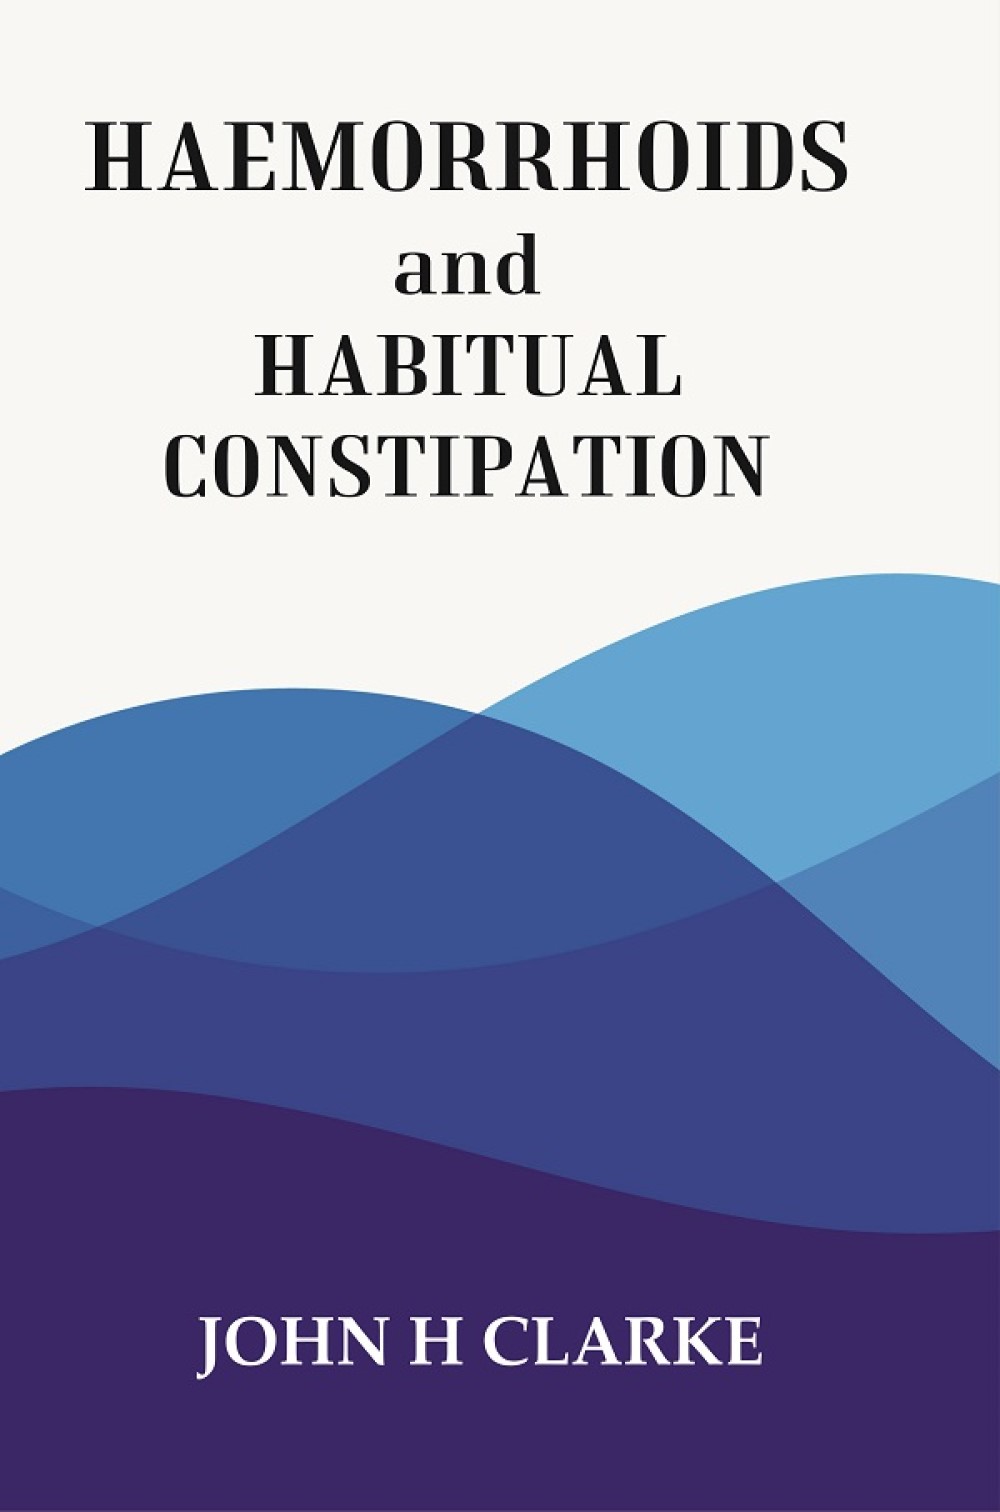 HAEMORRHOIDS and HABITUAL CONSTIPATION 1906 1906 1906 1906 1906 1906 1906 1906 1906 1906 1906 190...